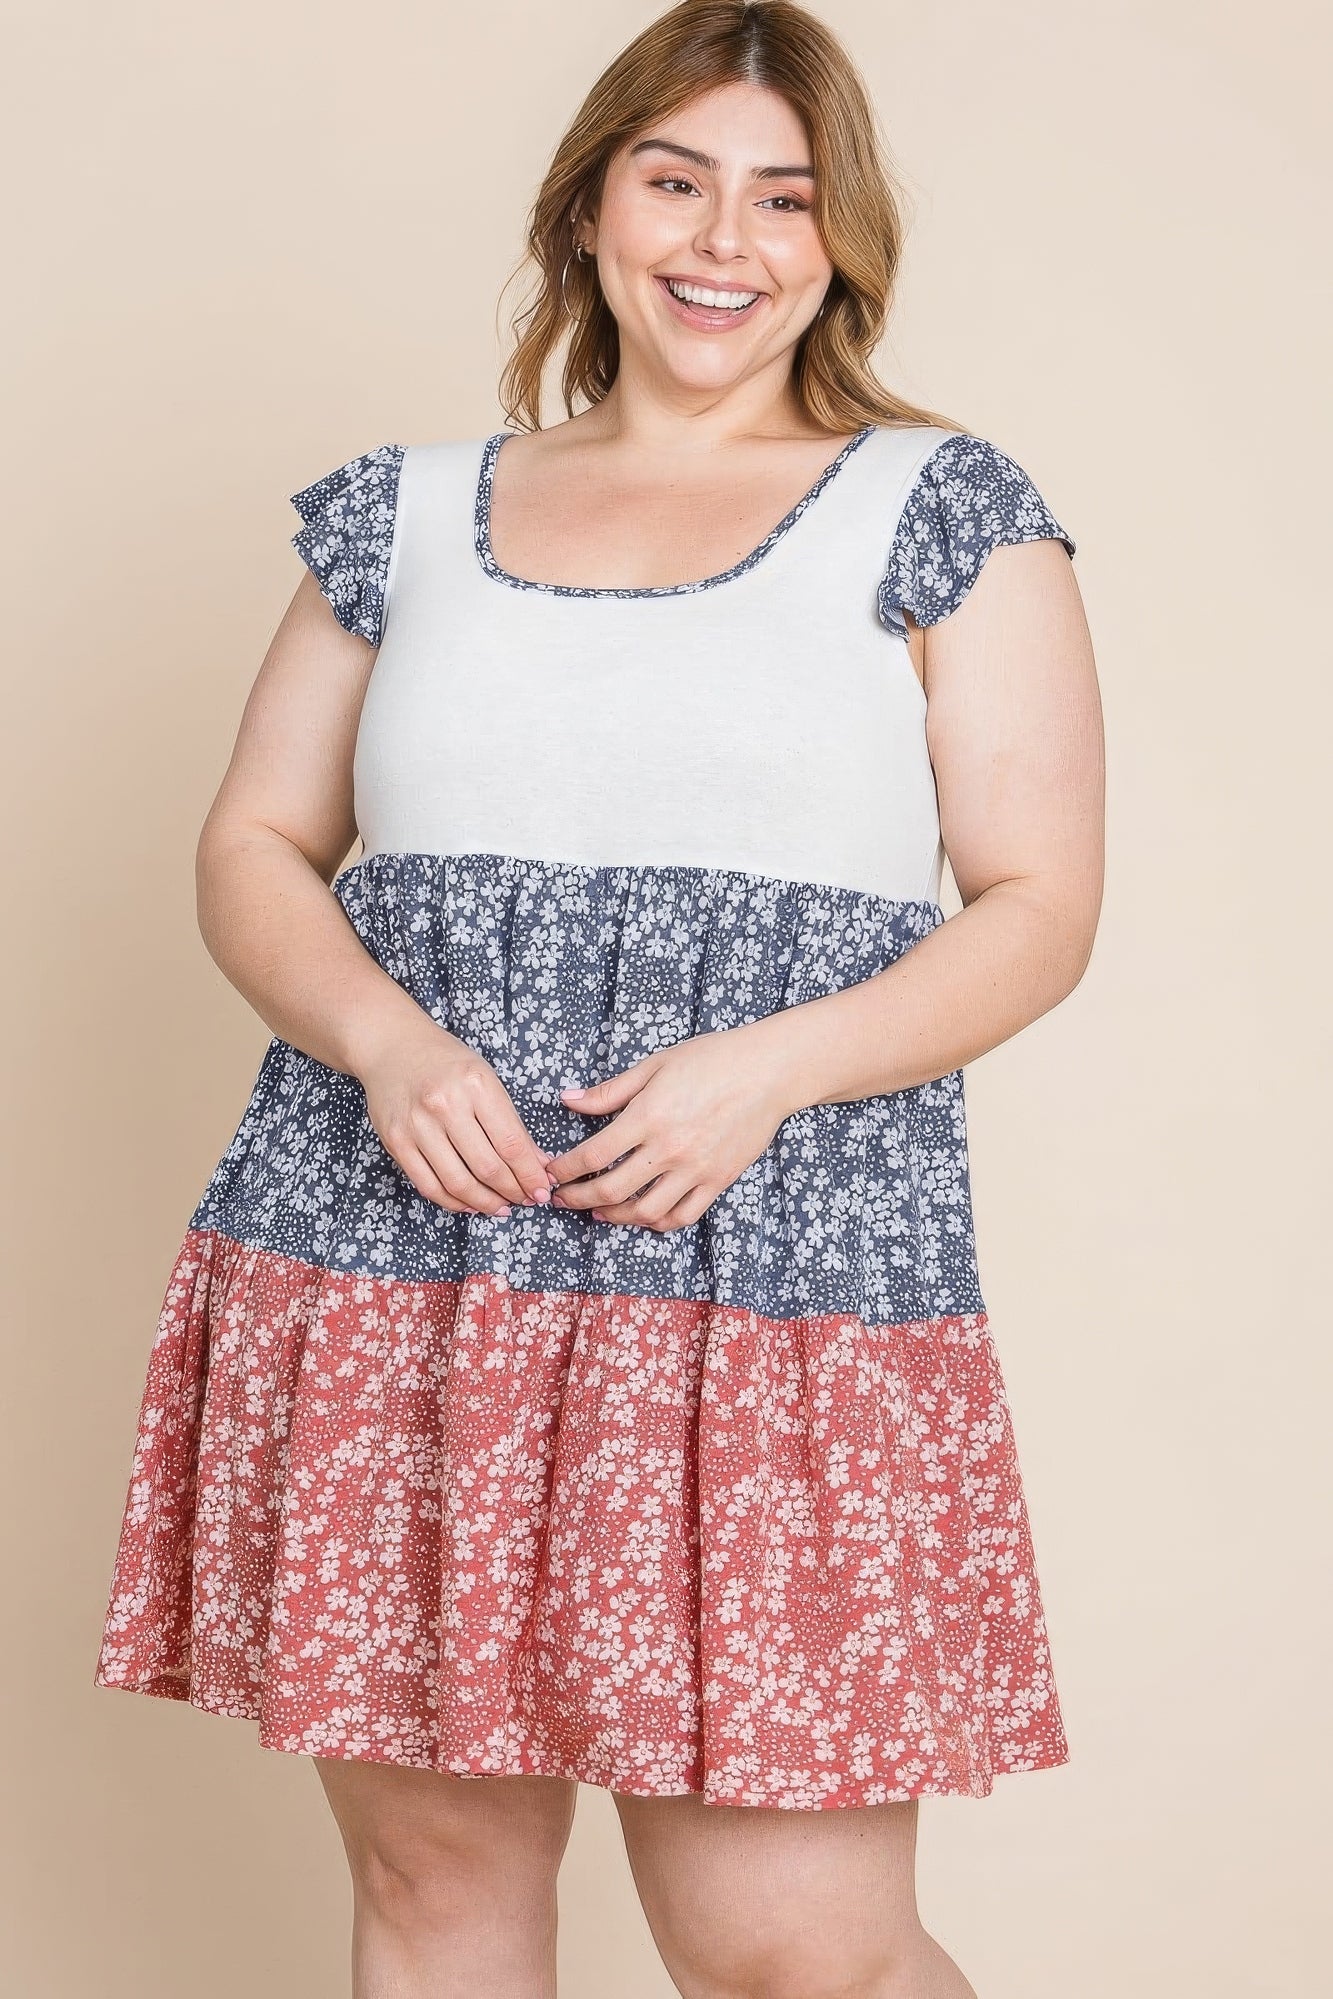 Plus Size Floral Color Block Contrast Tiered Babydoll Dress - Tigbul's Variety Fashion Shop